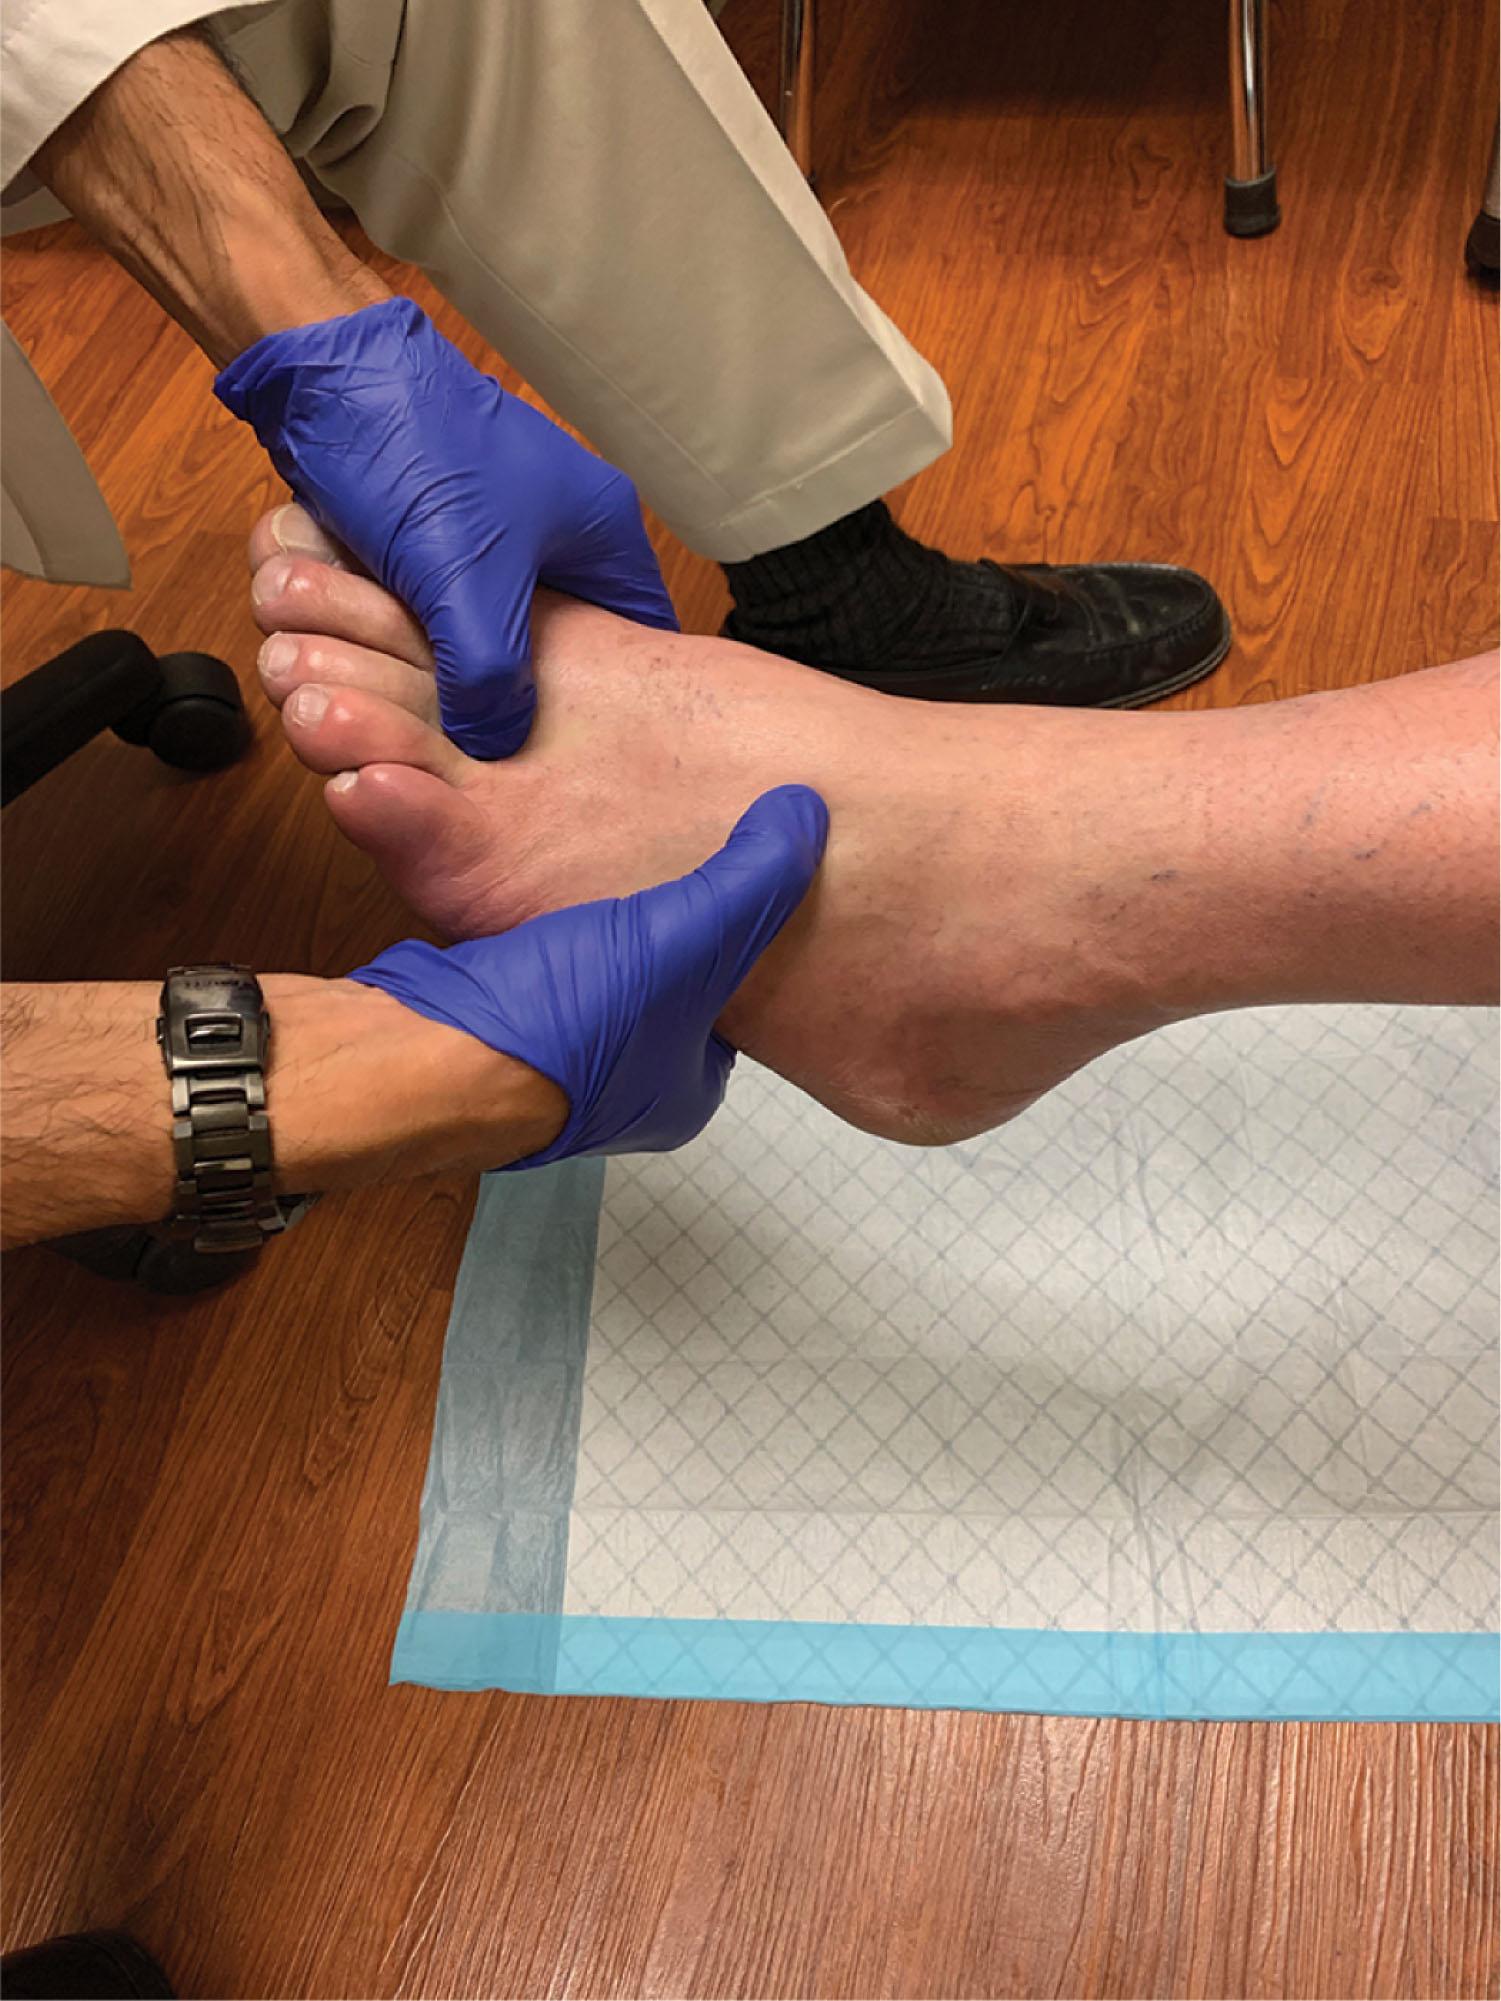 Fig. 21-16, The piano-key test is positive when a patient feels pain in their tarsometatarsal joint with a plantarly directed force applied to the metatarsal head.